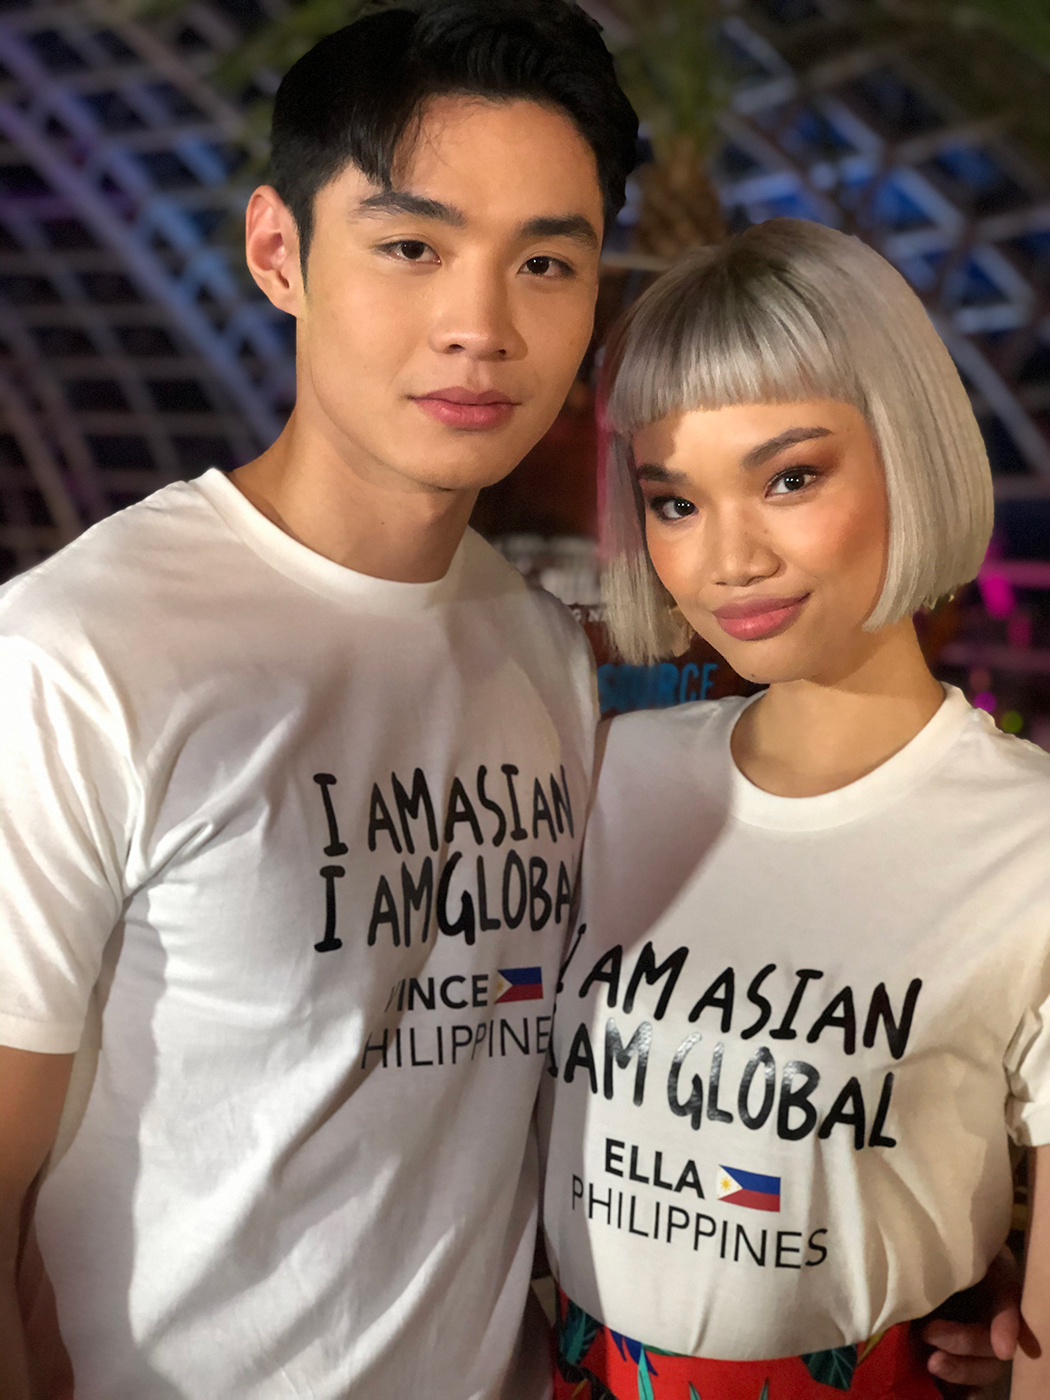 PHILIPPINE REPS. Vince Lennard Marcelo and Ella Lubag are the representatives of the Philippines to the model search. Photo by Voltaire Tayag/Rappler 